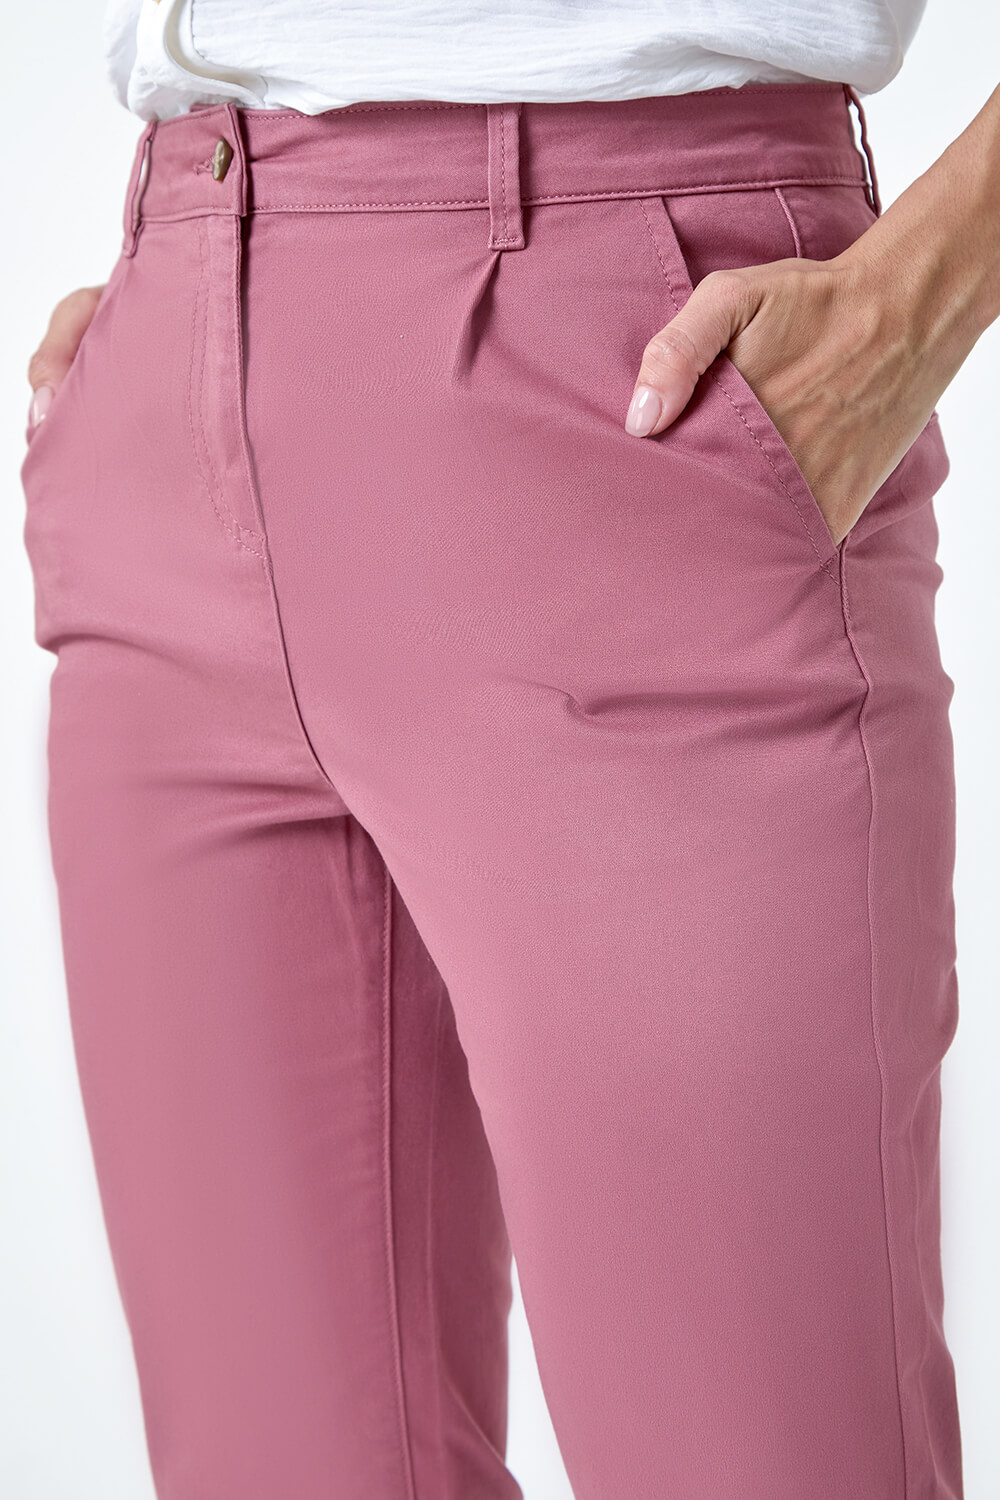 Rose Cotton Blend Cropped Chino Trousers, Image 5 of 5